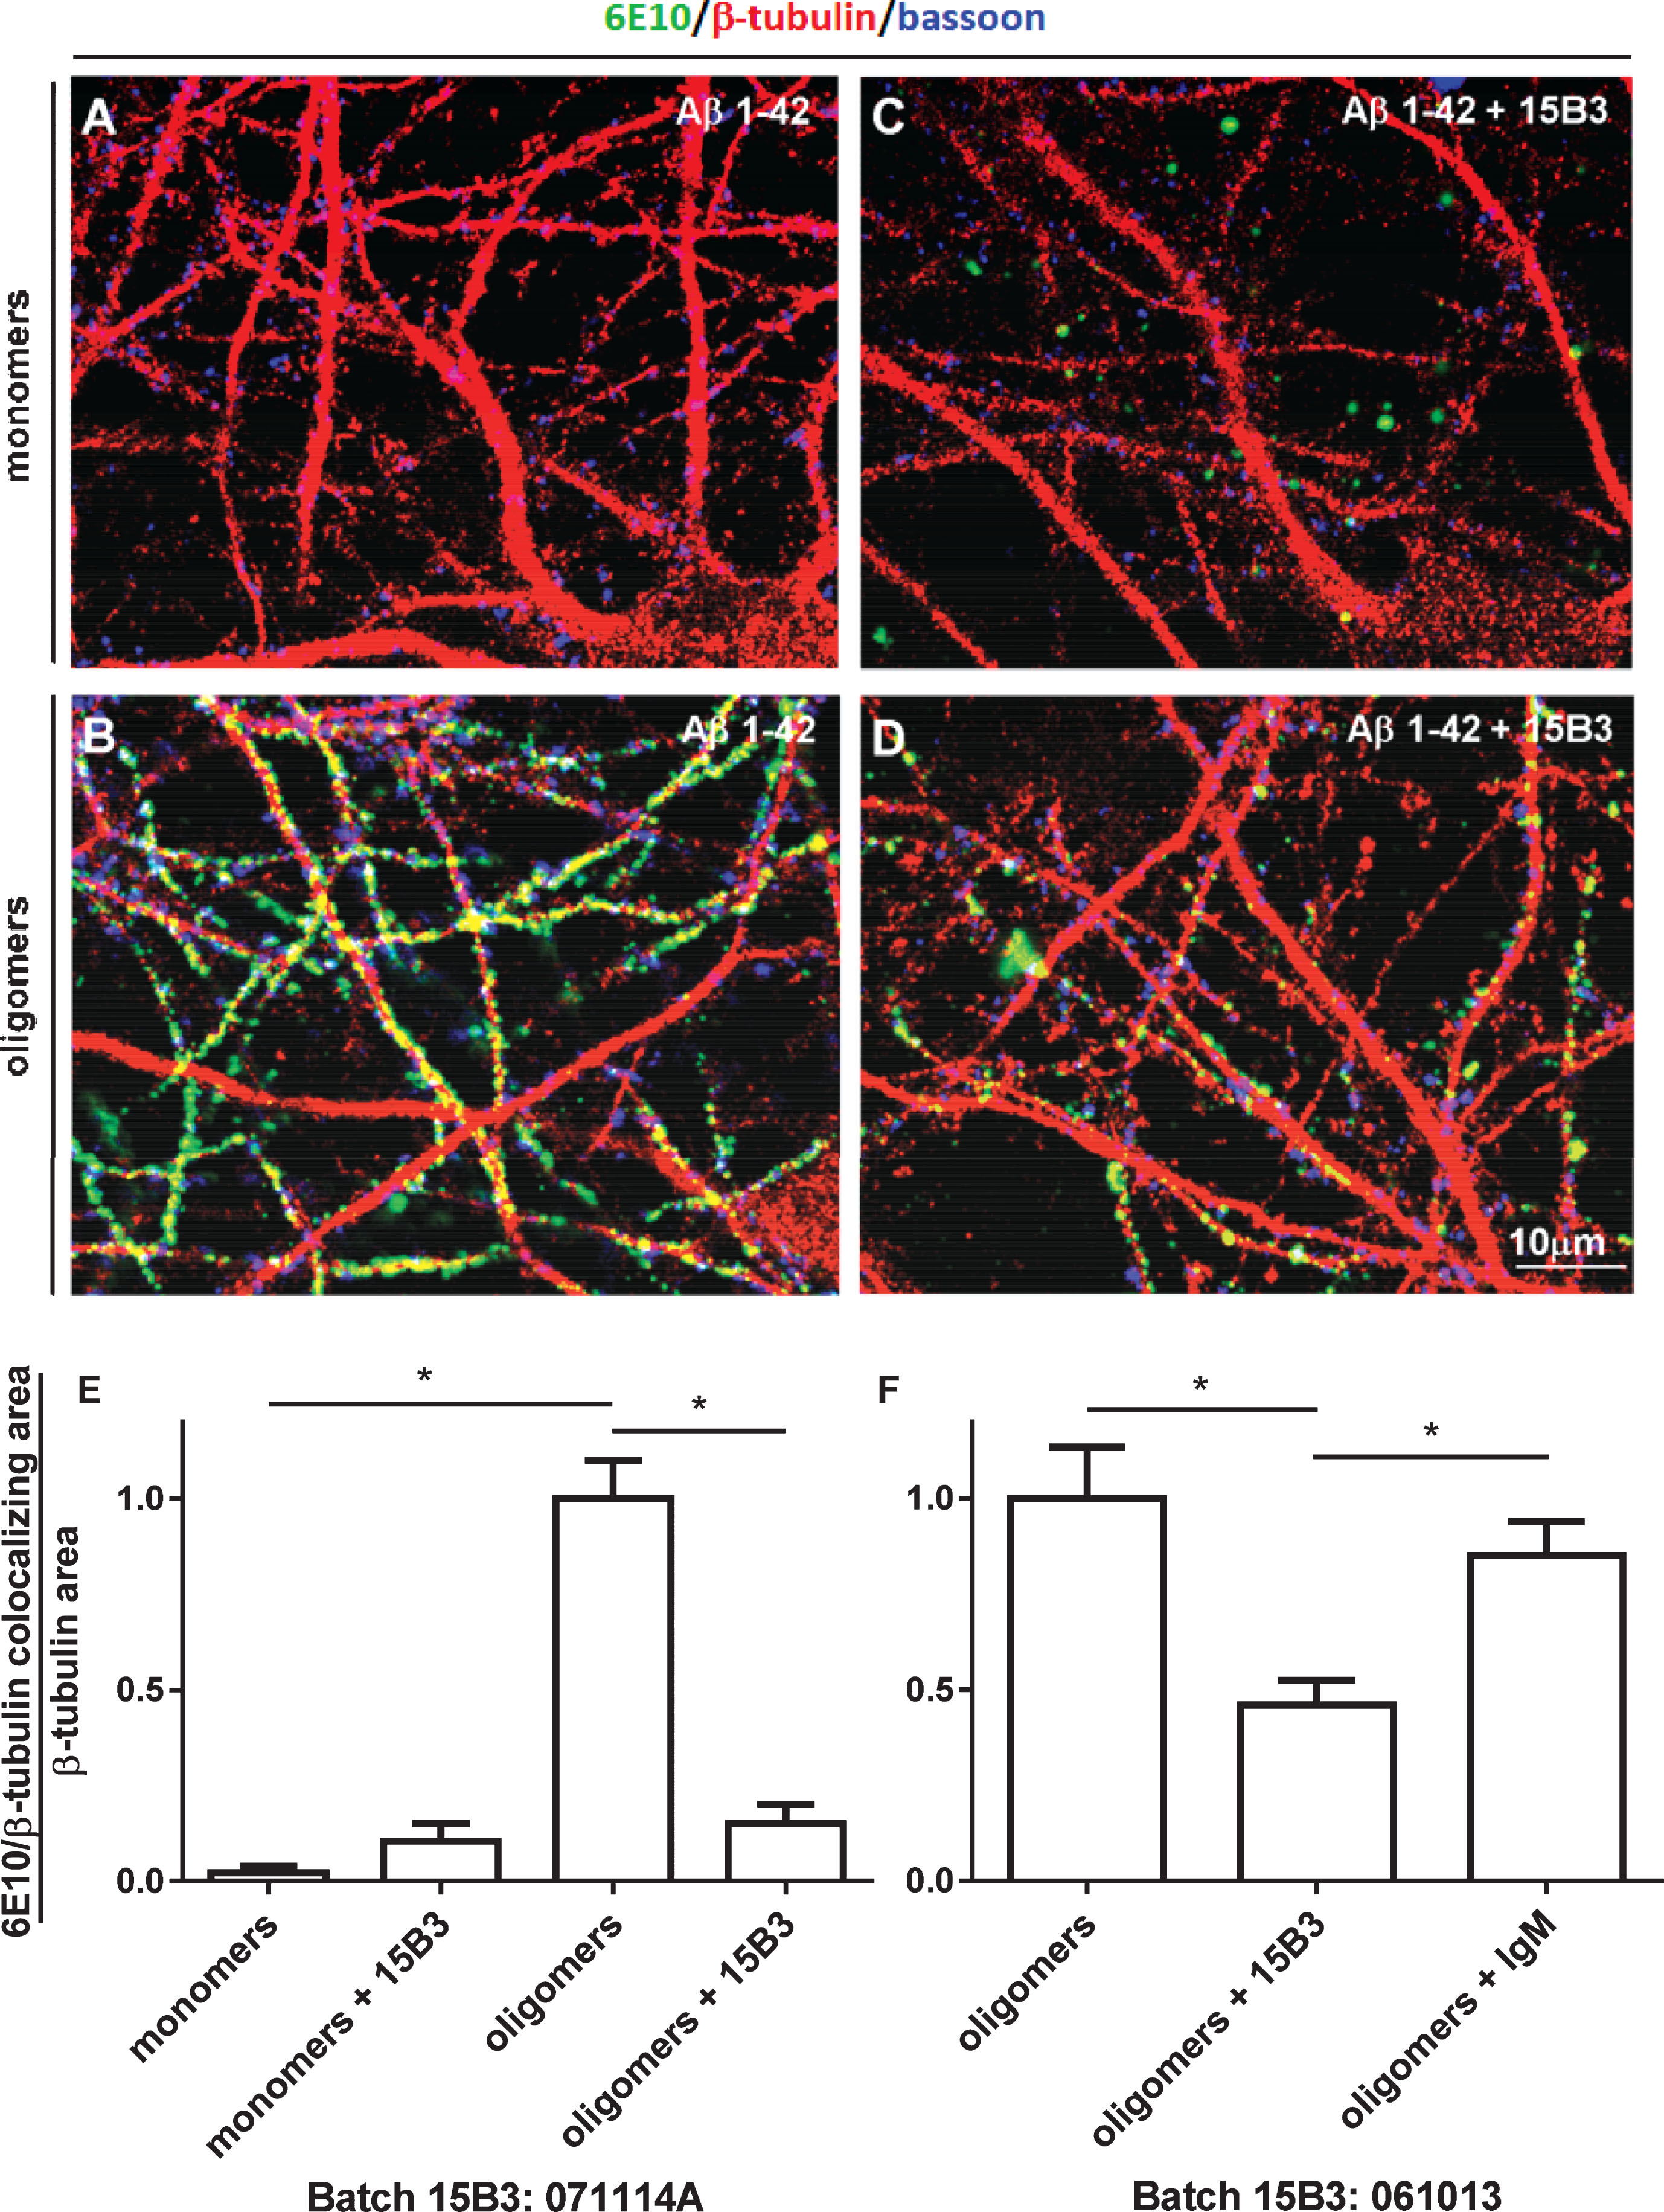 Effect of 15B3 on the binding of Aβ42 oligomers to rat hippocampal neurons—A–D) Representative images obtained exposing 12–15 DIV hippocampal neurons for 1 h to solutions containing (A) Aβ42 monomers or (B) Aβ42 oligomers. The final concentration of Aβ42 was 1 μM in both cases. C, D) Neurons exposed to 1 μM Aβ42 monomers or oligomers pre-incubated for 30 min with 15B3 (batch # 071114A, 10 nM). Neurons were washed, fixed with 4% paraformaldehyde and stained using the following antibodies: mouse anti-Aβ, 6E10 (green), rabbit anti-β tubulin (red) and guinea pig anti-Bassoon (blue). E) Corresponding quantification of 6E10 binding to cultured neurons expressed as colocalizing area between 6E10 and β-tubulin, relative to total β-tubulin. Mean ± SEM of 20 fields from two independent experiments, *p < 0.05 Dunn’s test after Kruskal-Wallis One Way Analysis of Variance on Ranks (this statistical analysis was used because the normality test failed). F) Quantification of a third experiment with 15B3 batch # 061013 and control IgM, both 10 nM. Mean ± SEM of 10 fields, *p < 0.05 Holm-Sidak test after One Way Analysis of Variance (used because the normality test passed).